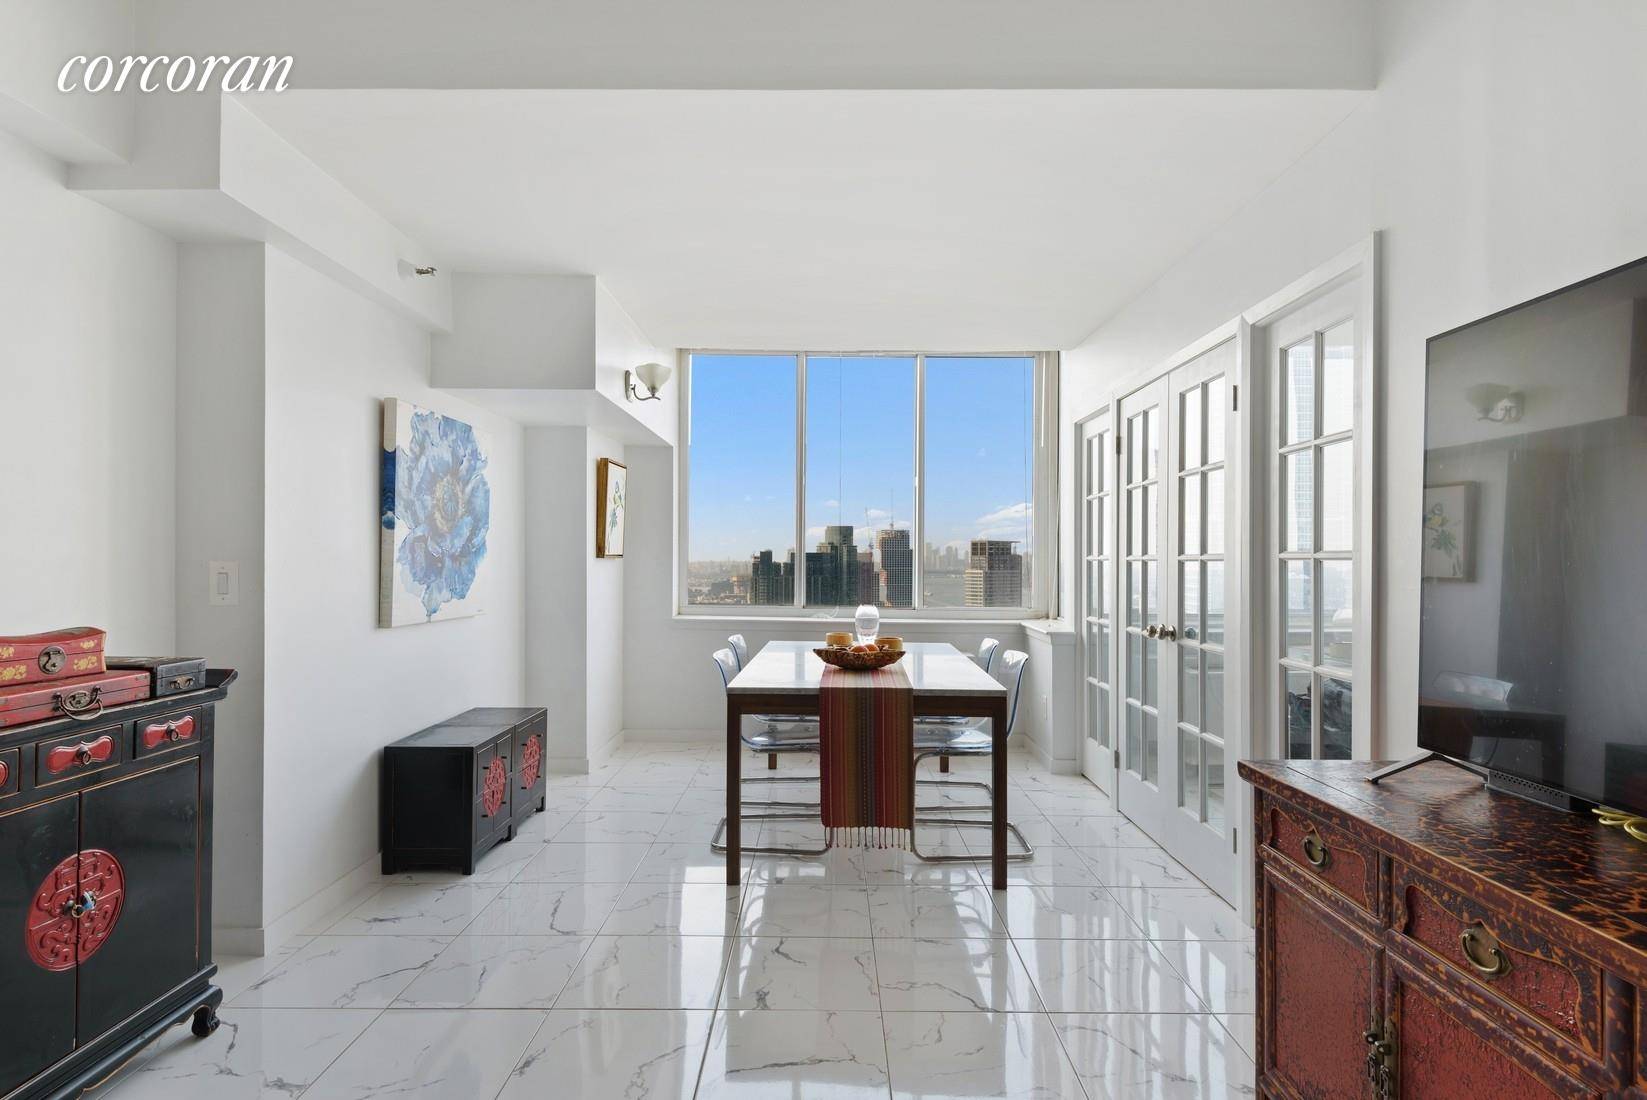 Unit 36H is a large corner one bedroom plus home office layout with 270 degree panoramic western, southern and eastern views of midtown and downtown Manhattan, the East Side River, ...